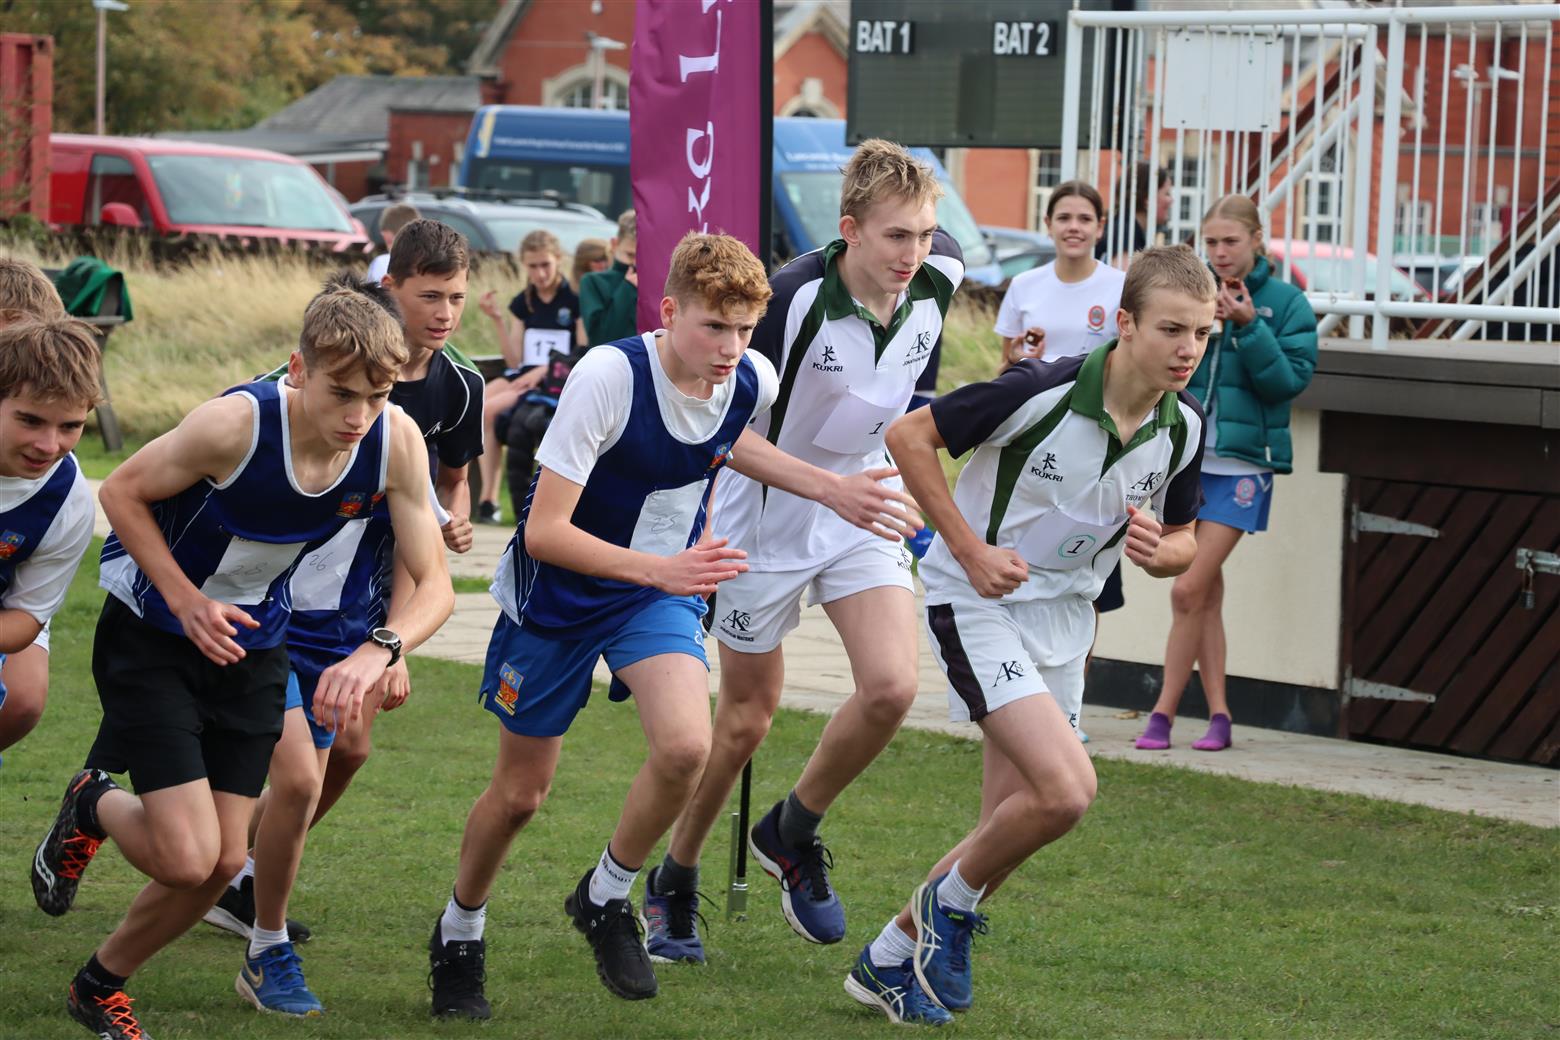 AKS host ESSA North West Lancashire Cross Country Cup